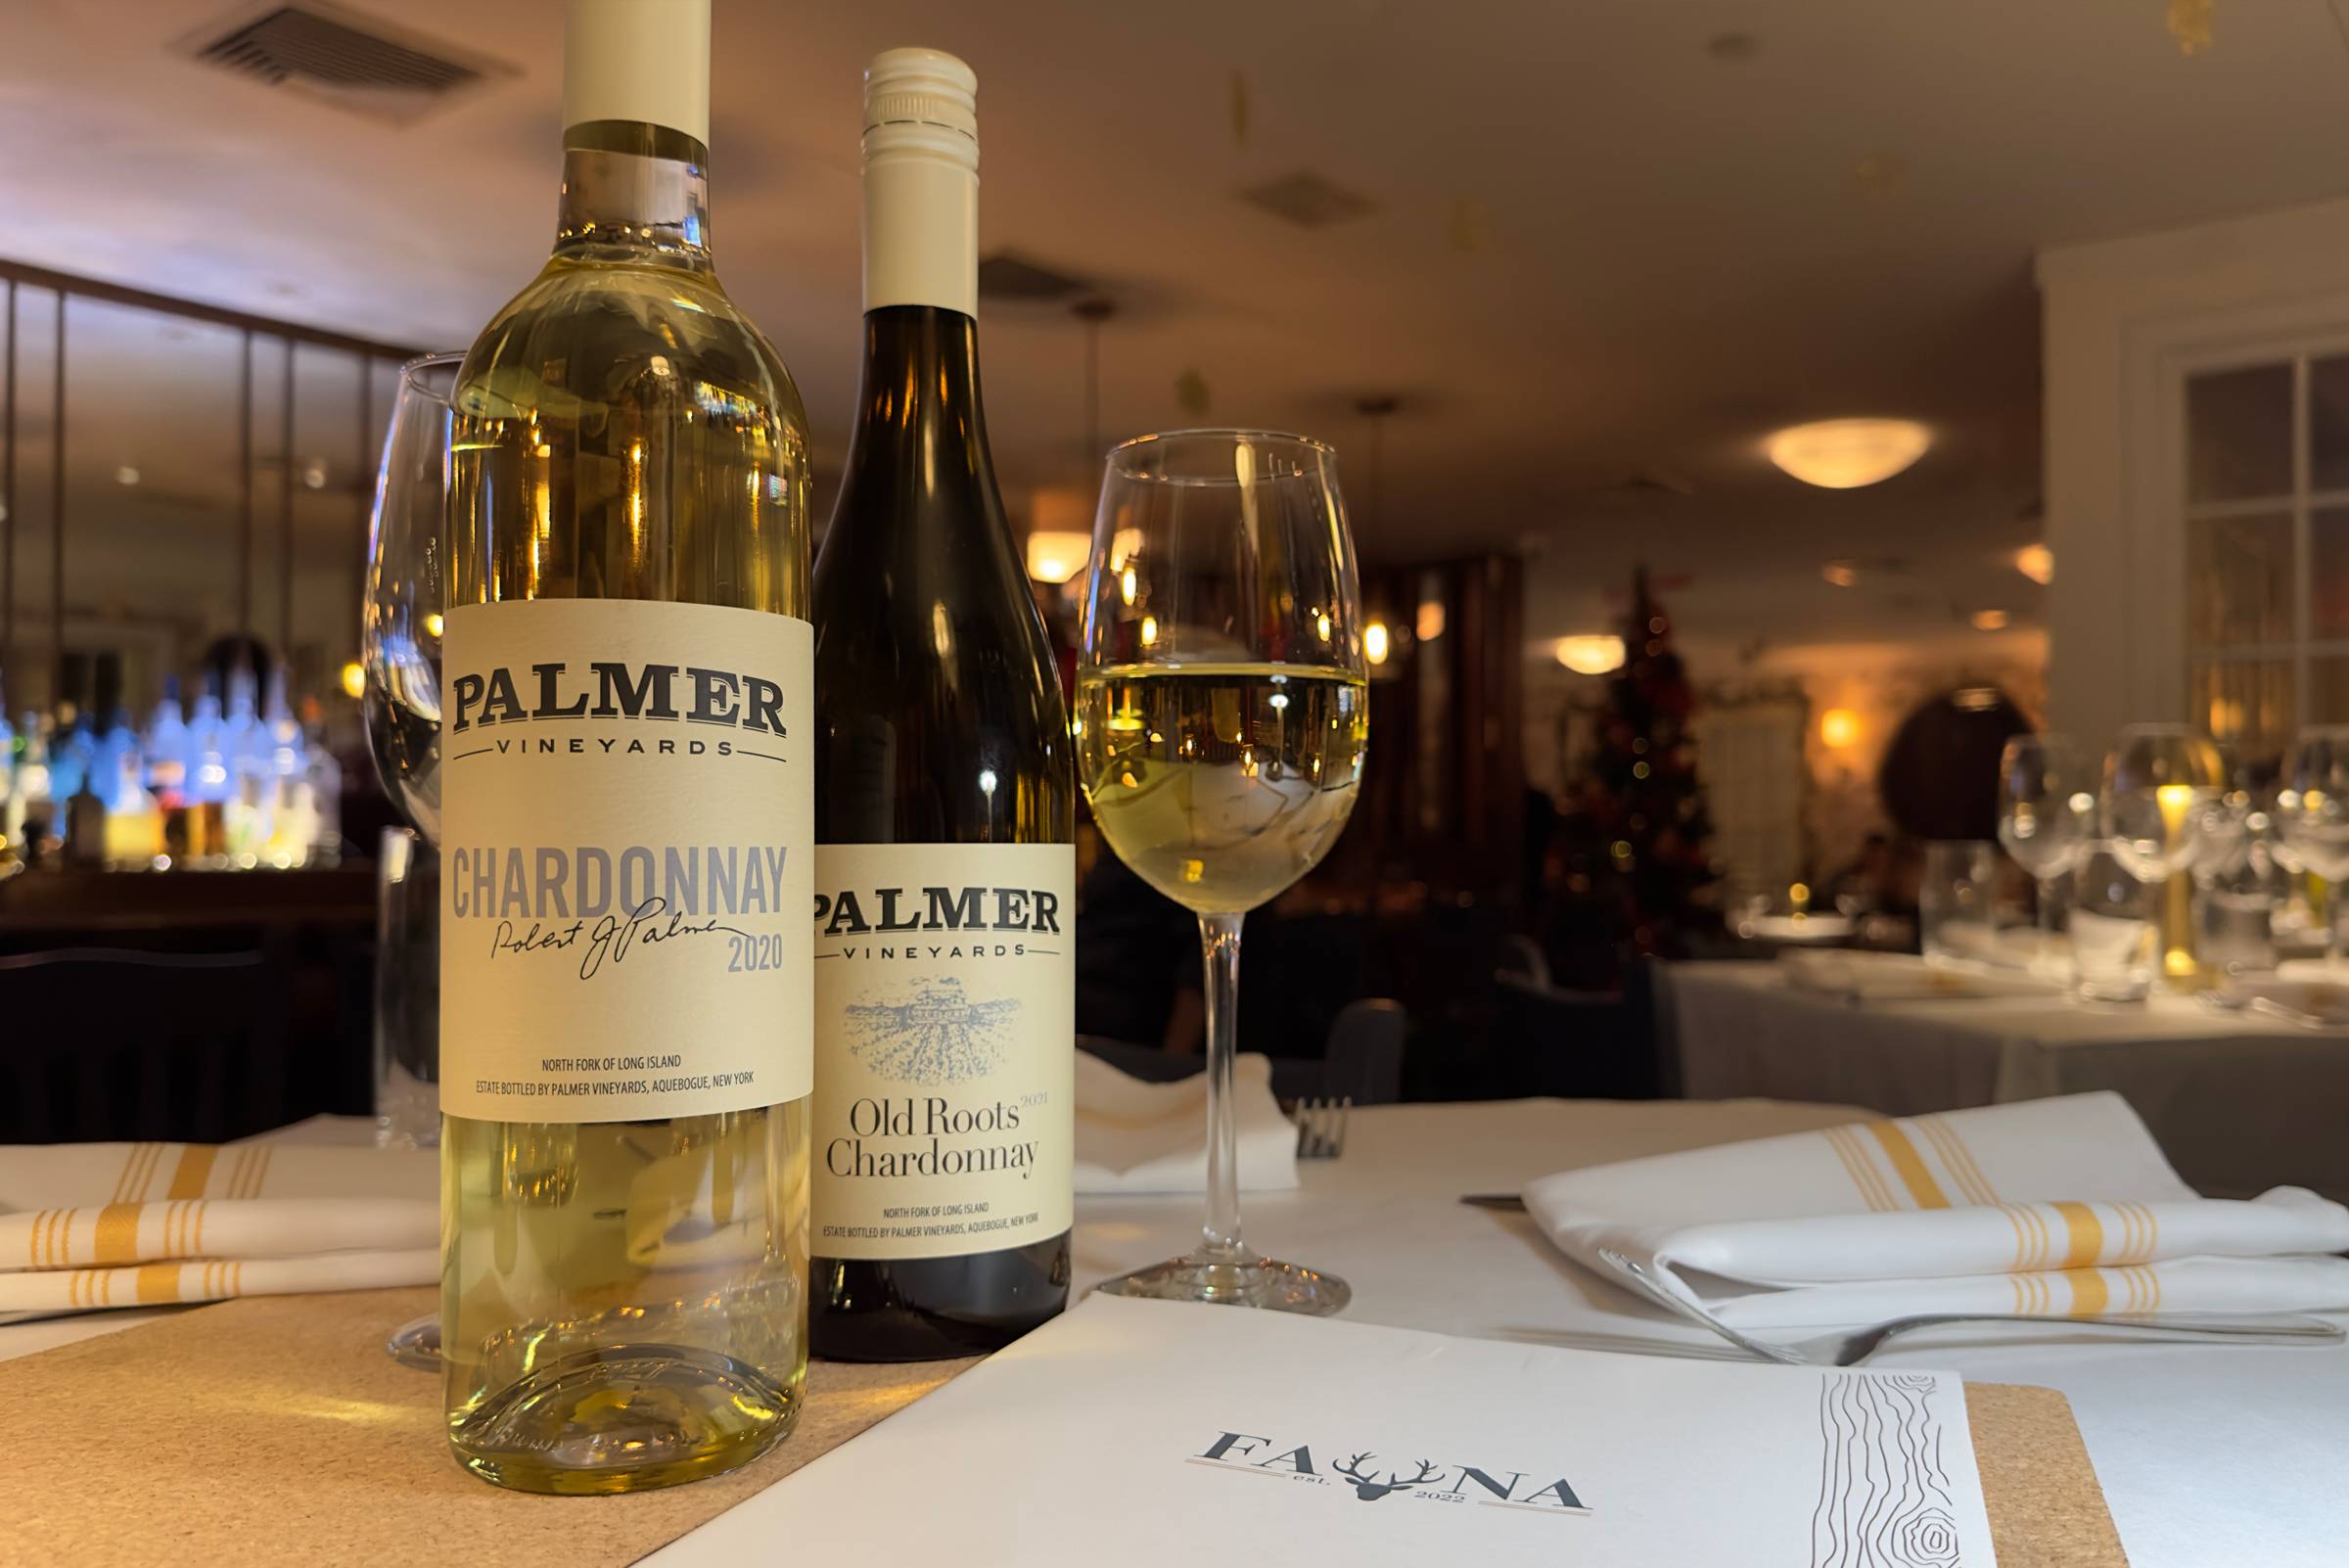 Fauna Wine Dinner featuring Palmer Vineyards on January 19th!